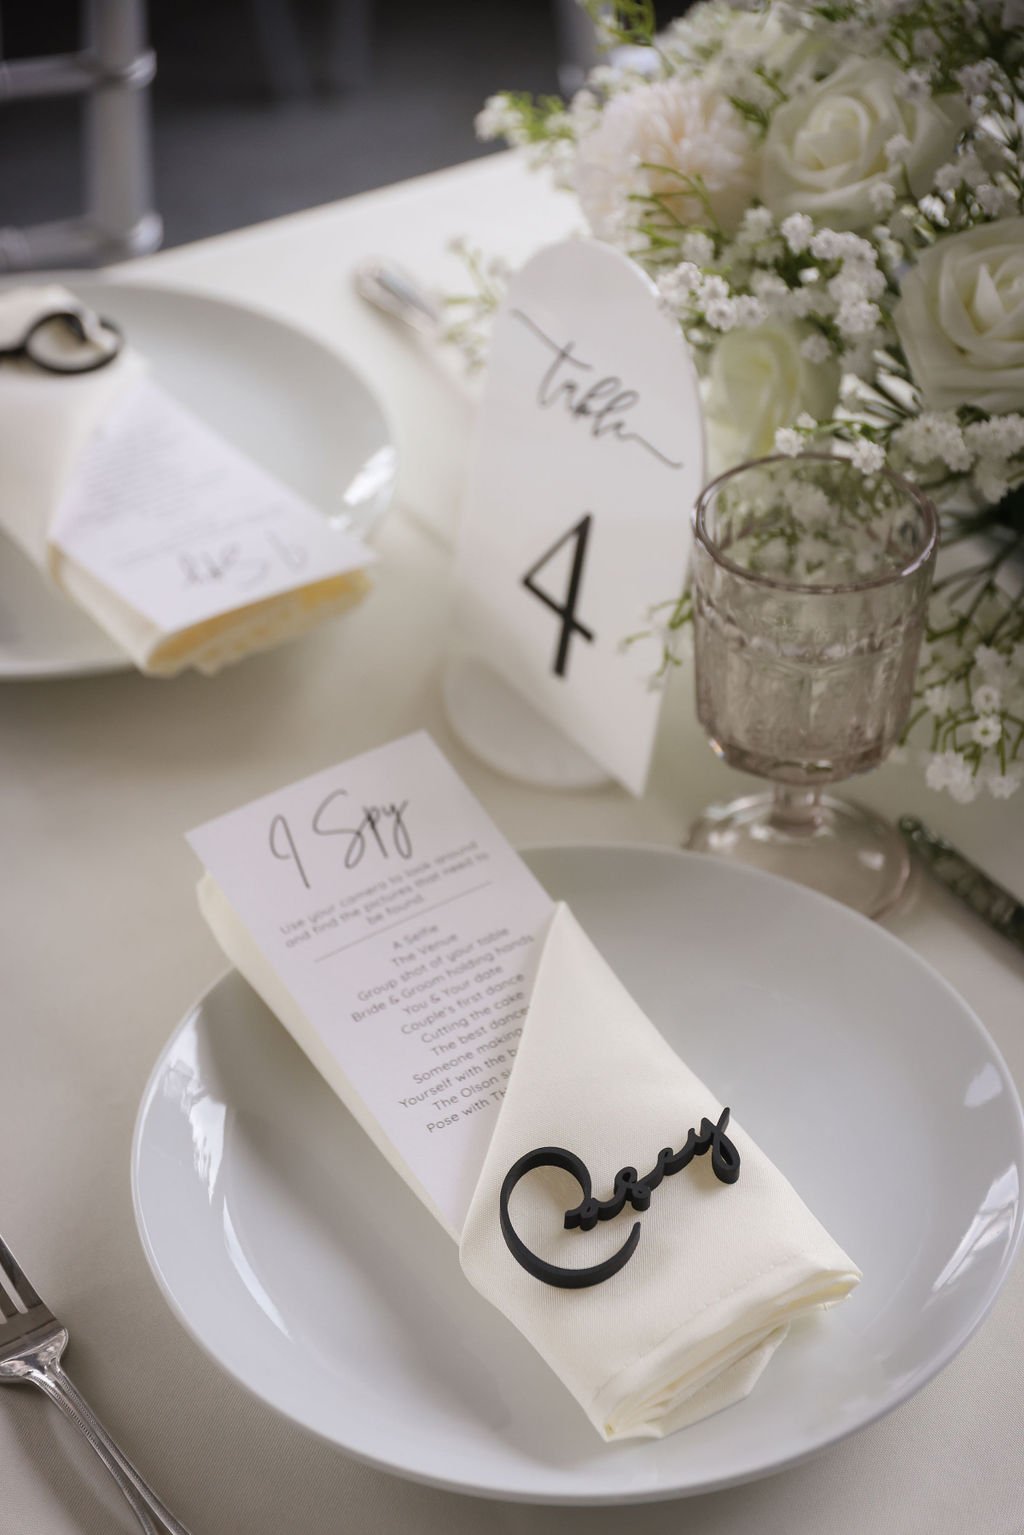 Gorgeous wedding table details of place settings.jpg